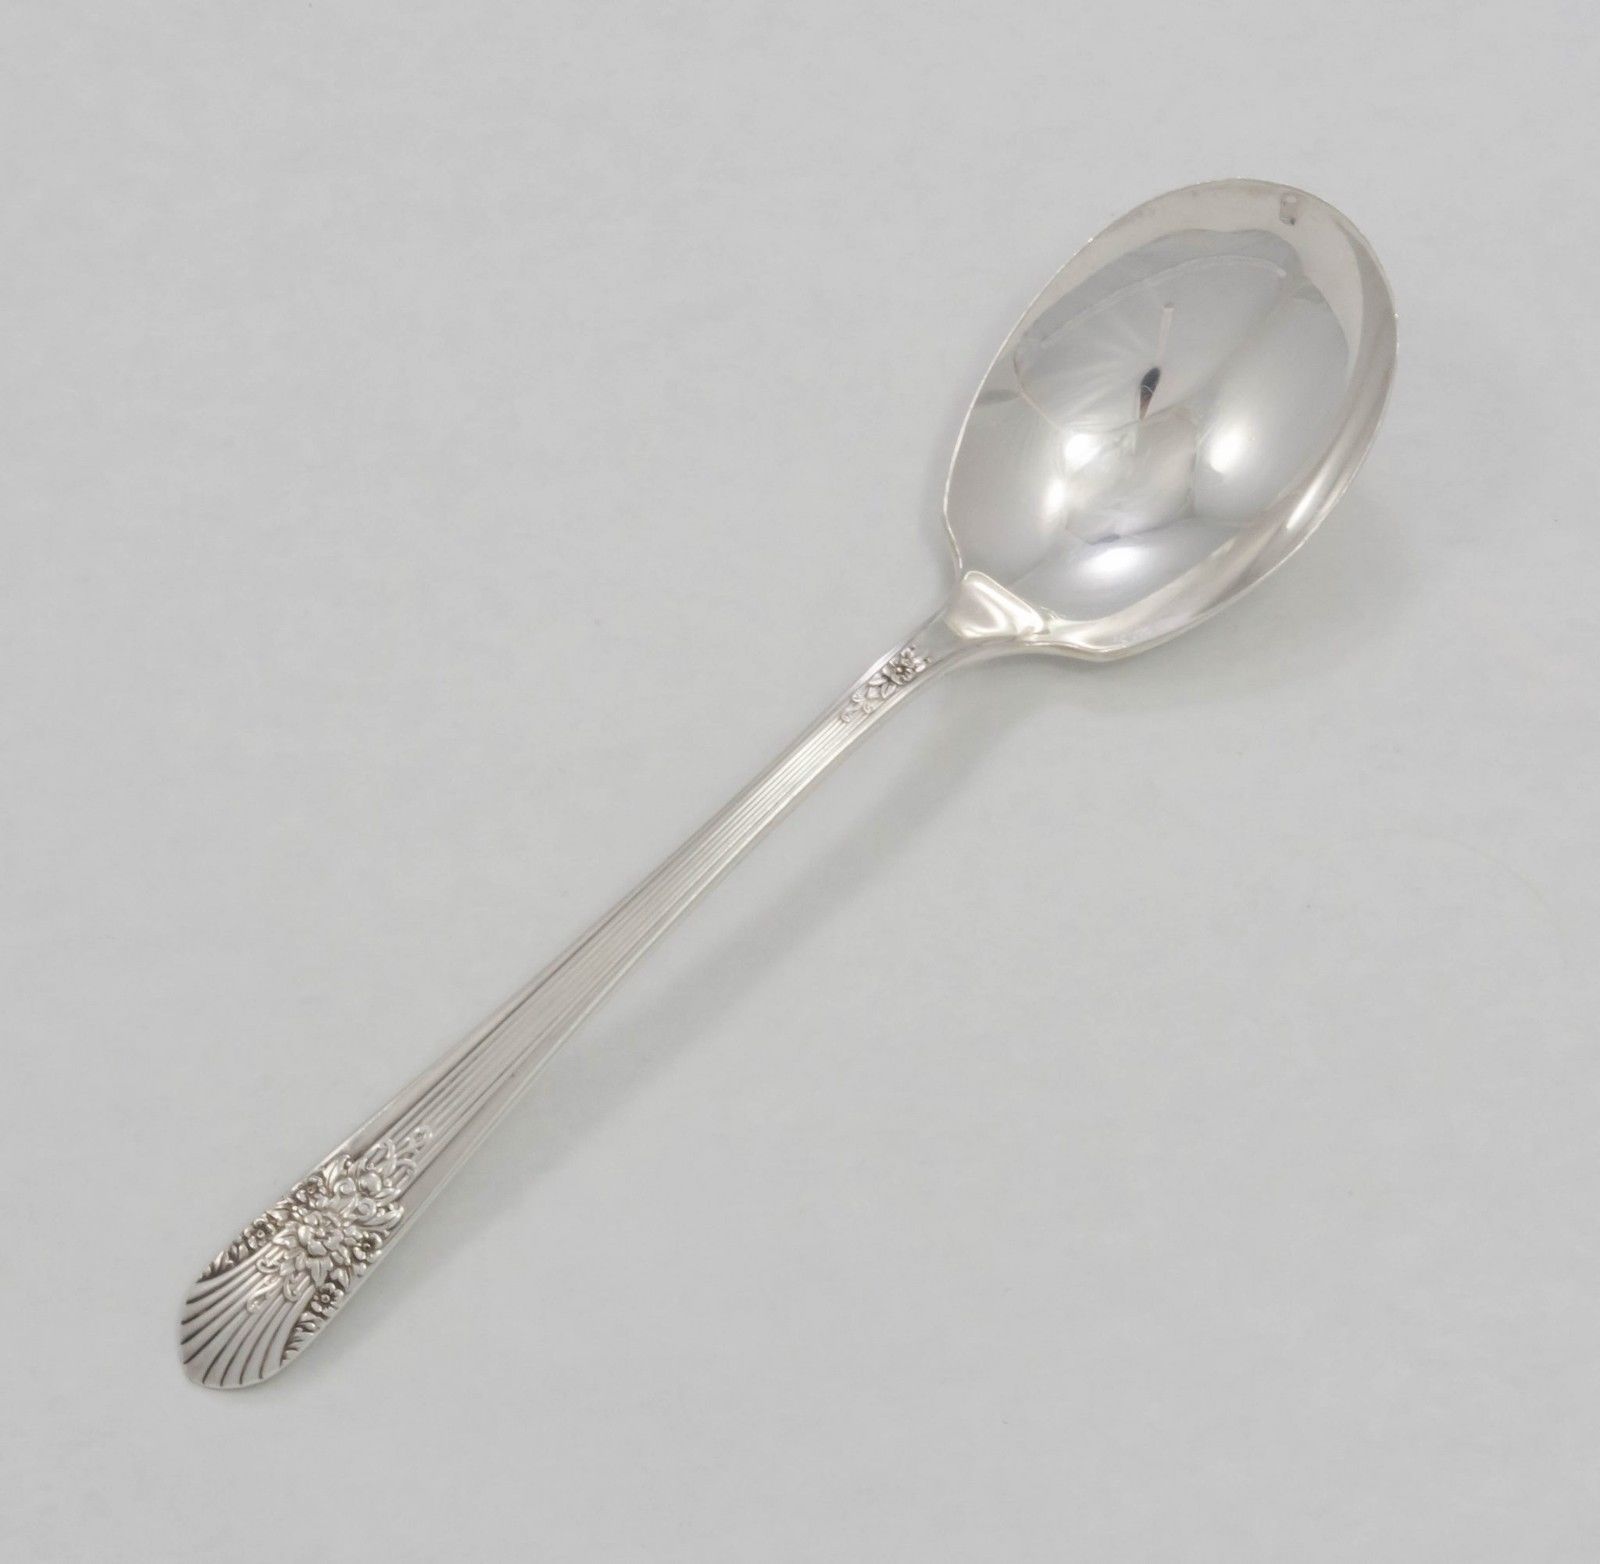 Primary image for Orleans by International / Century Sterling Sugar Spoon 5 7/8" - No Monogram